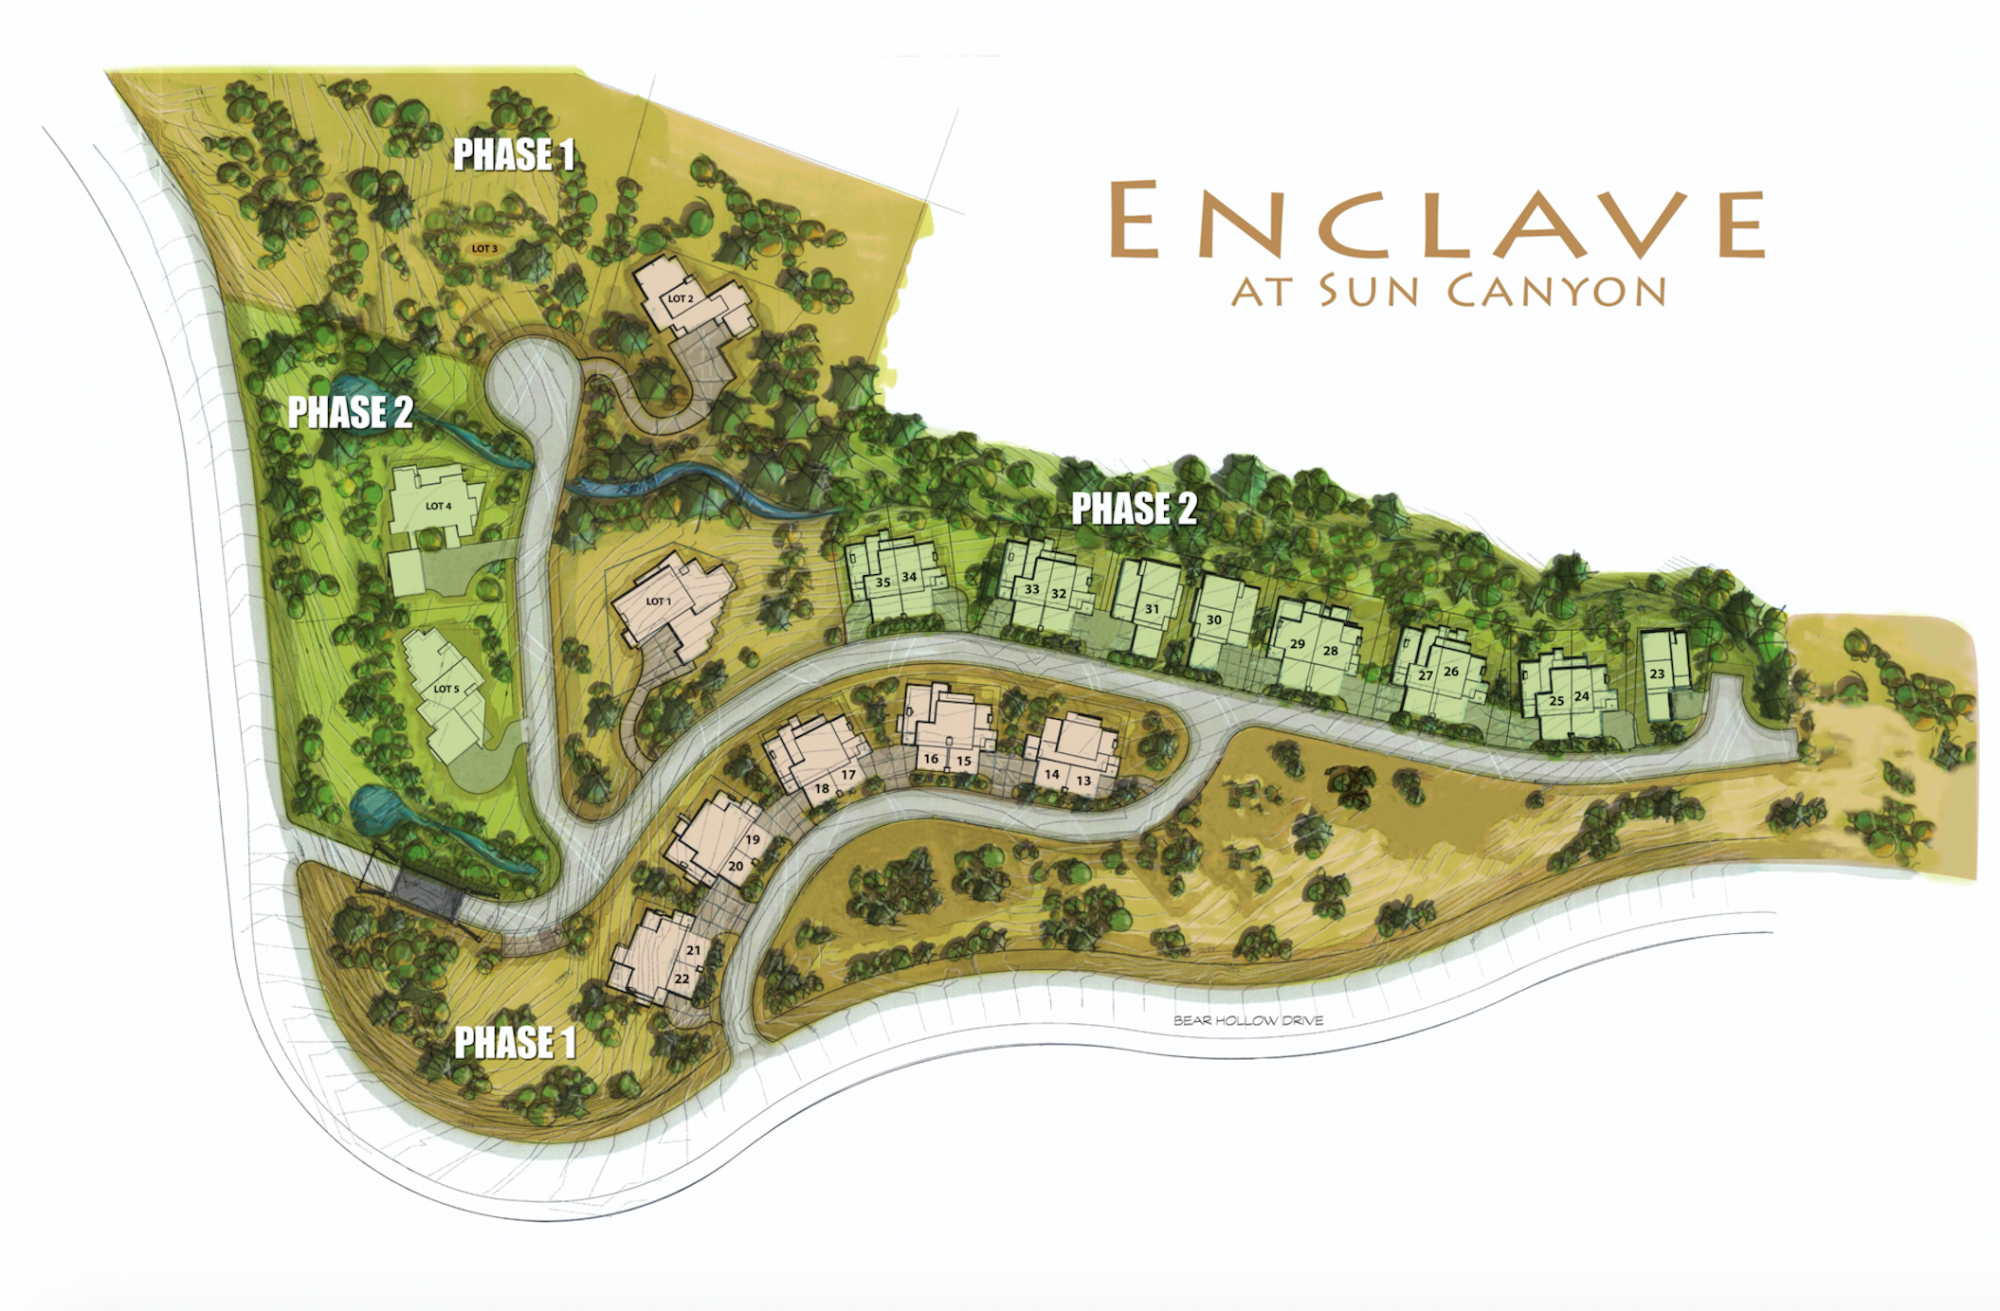 Enclave at Sun Canyon Contemporary Homes for Sale Park City Utah